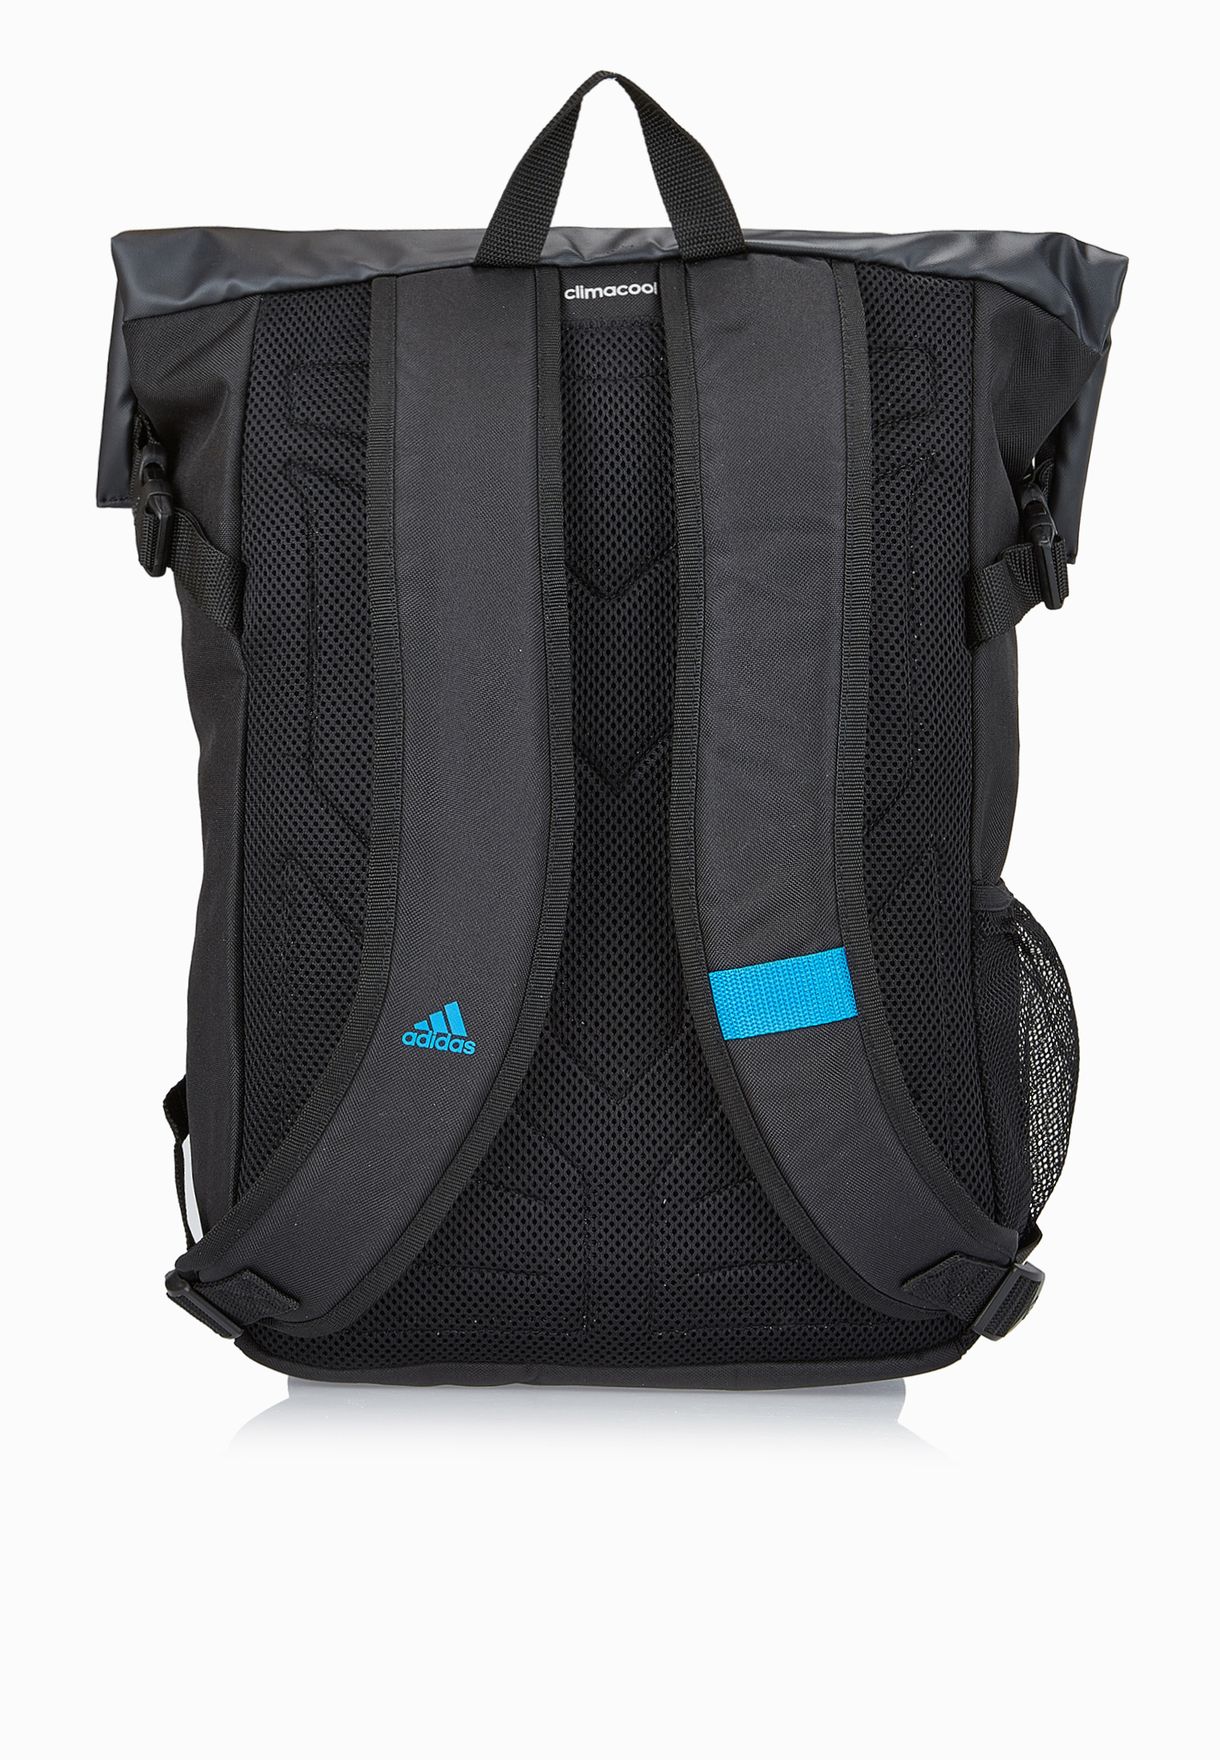 adidas messi backpack